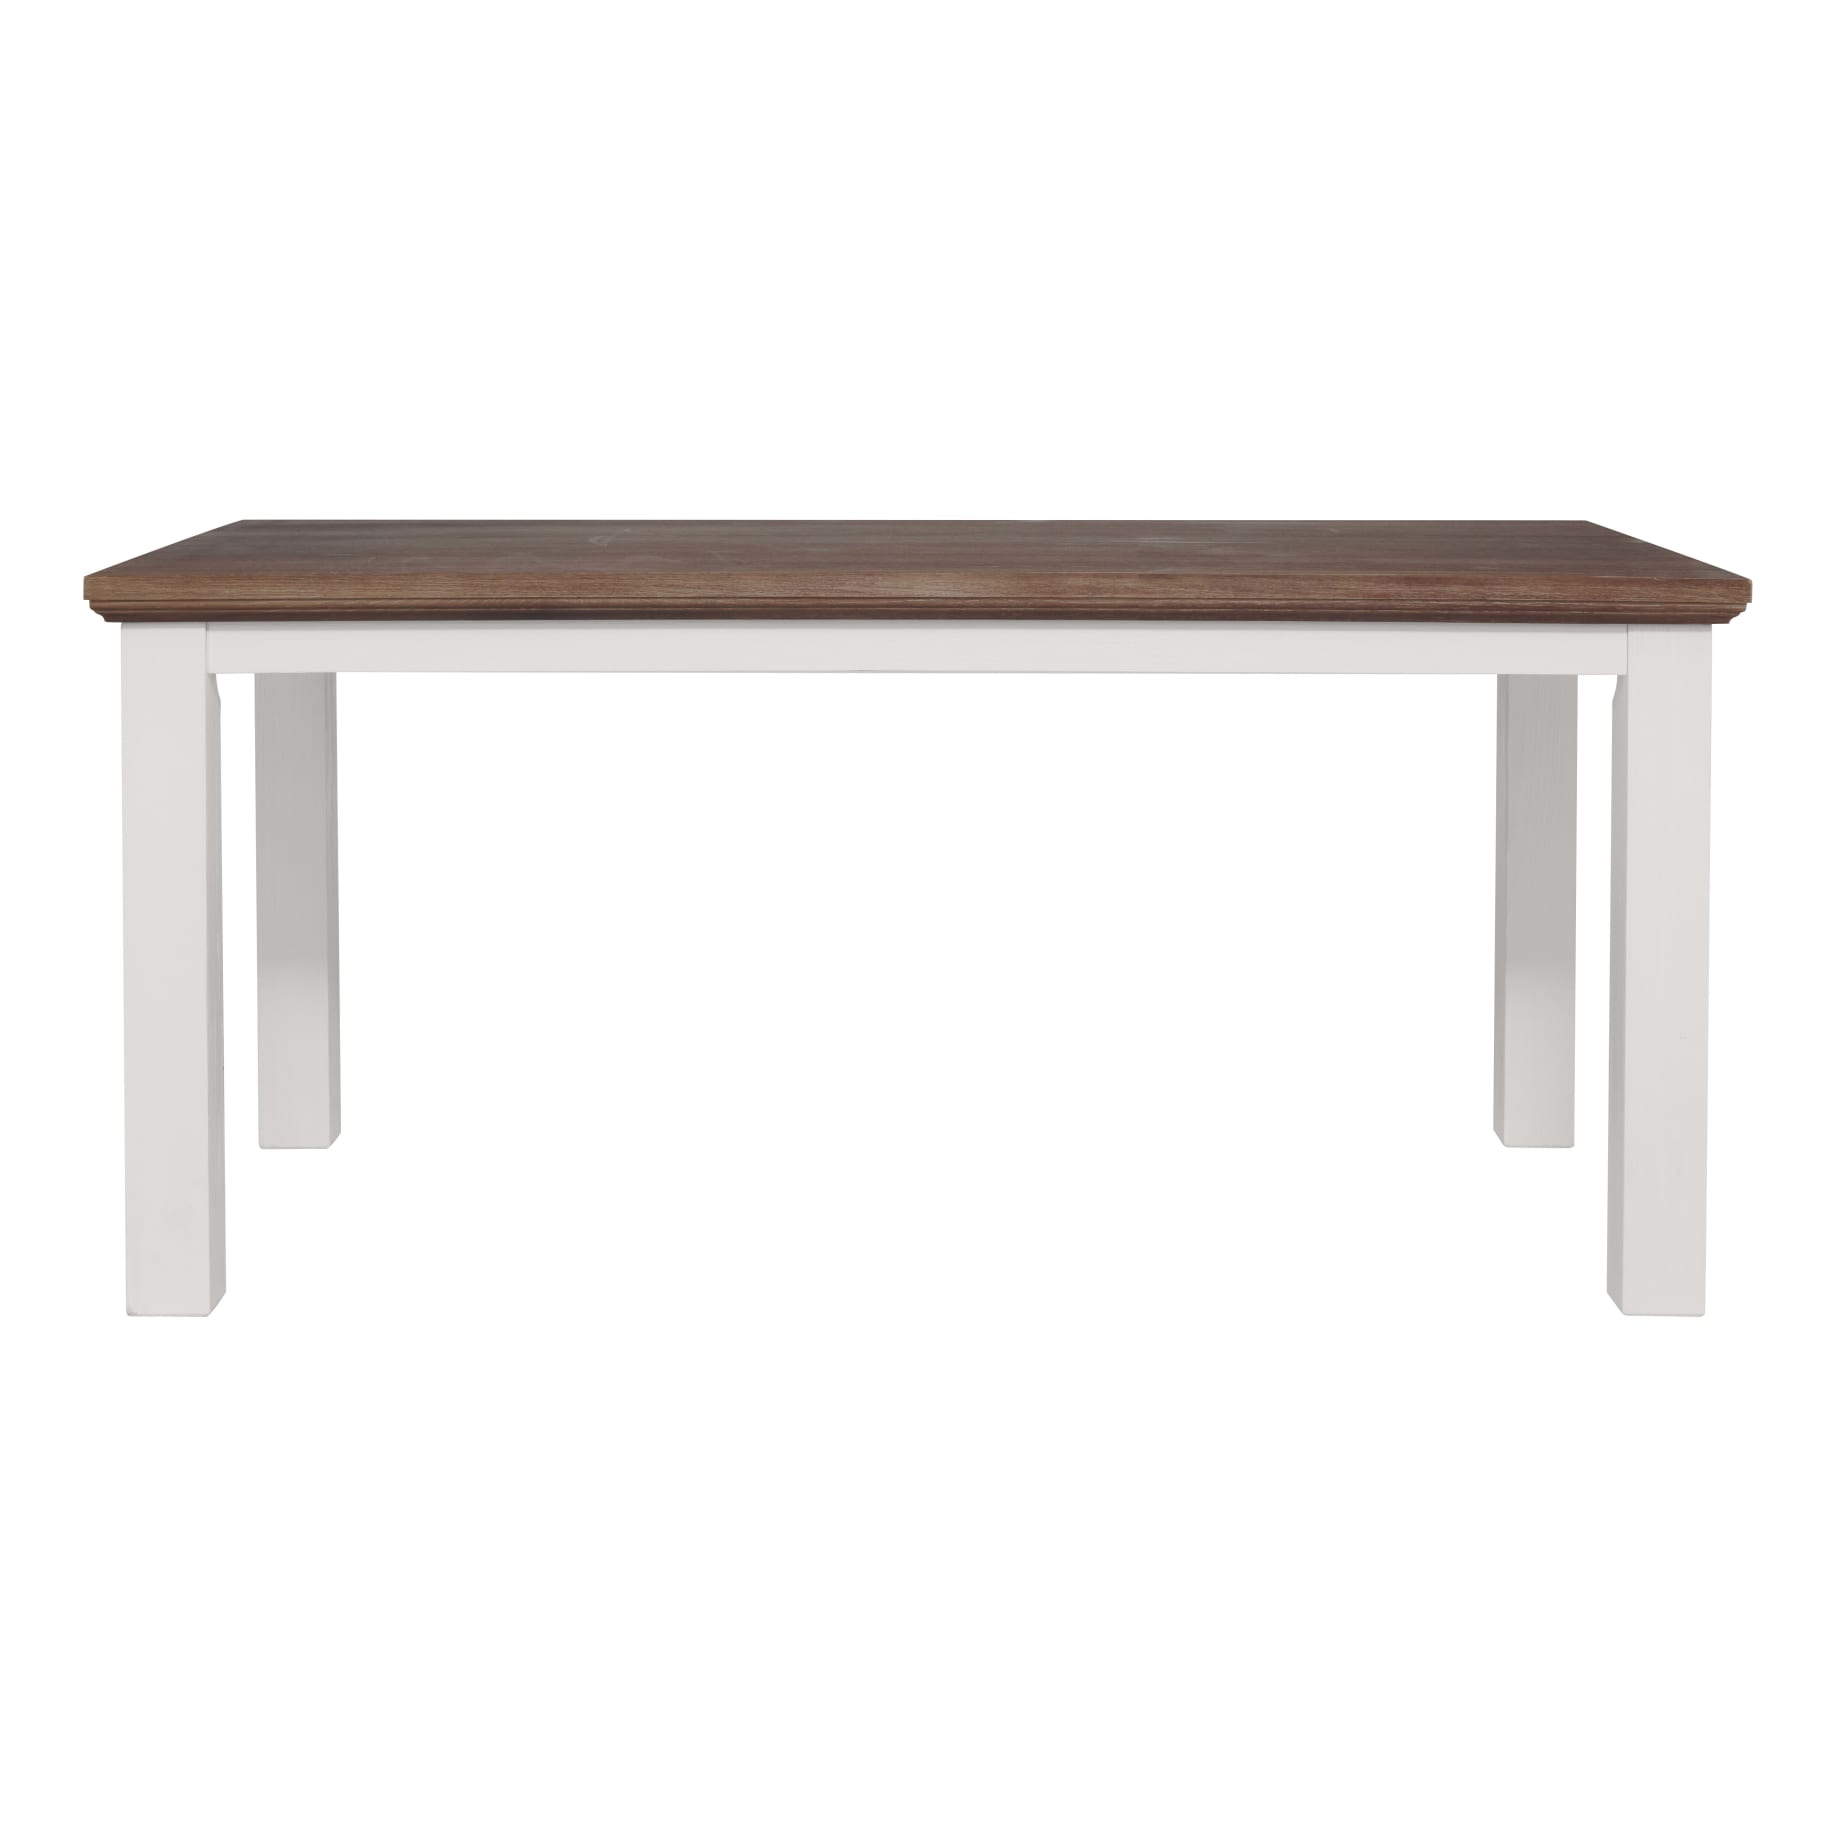 Hamptons Dining Table 180cm in Acacia Two Tone